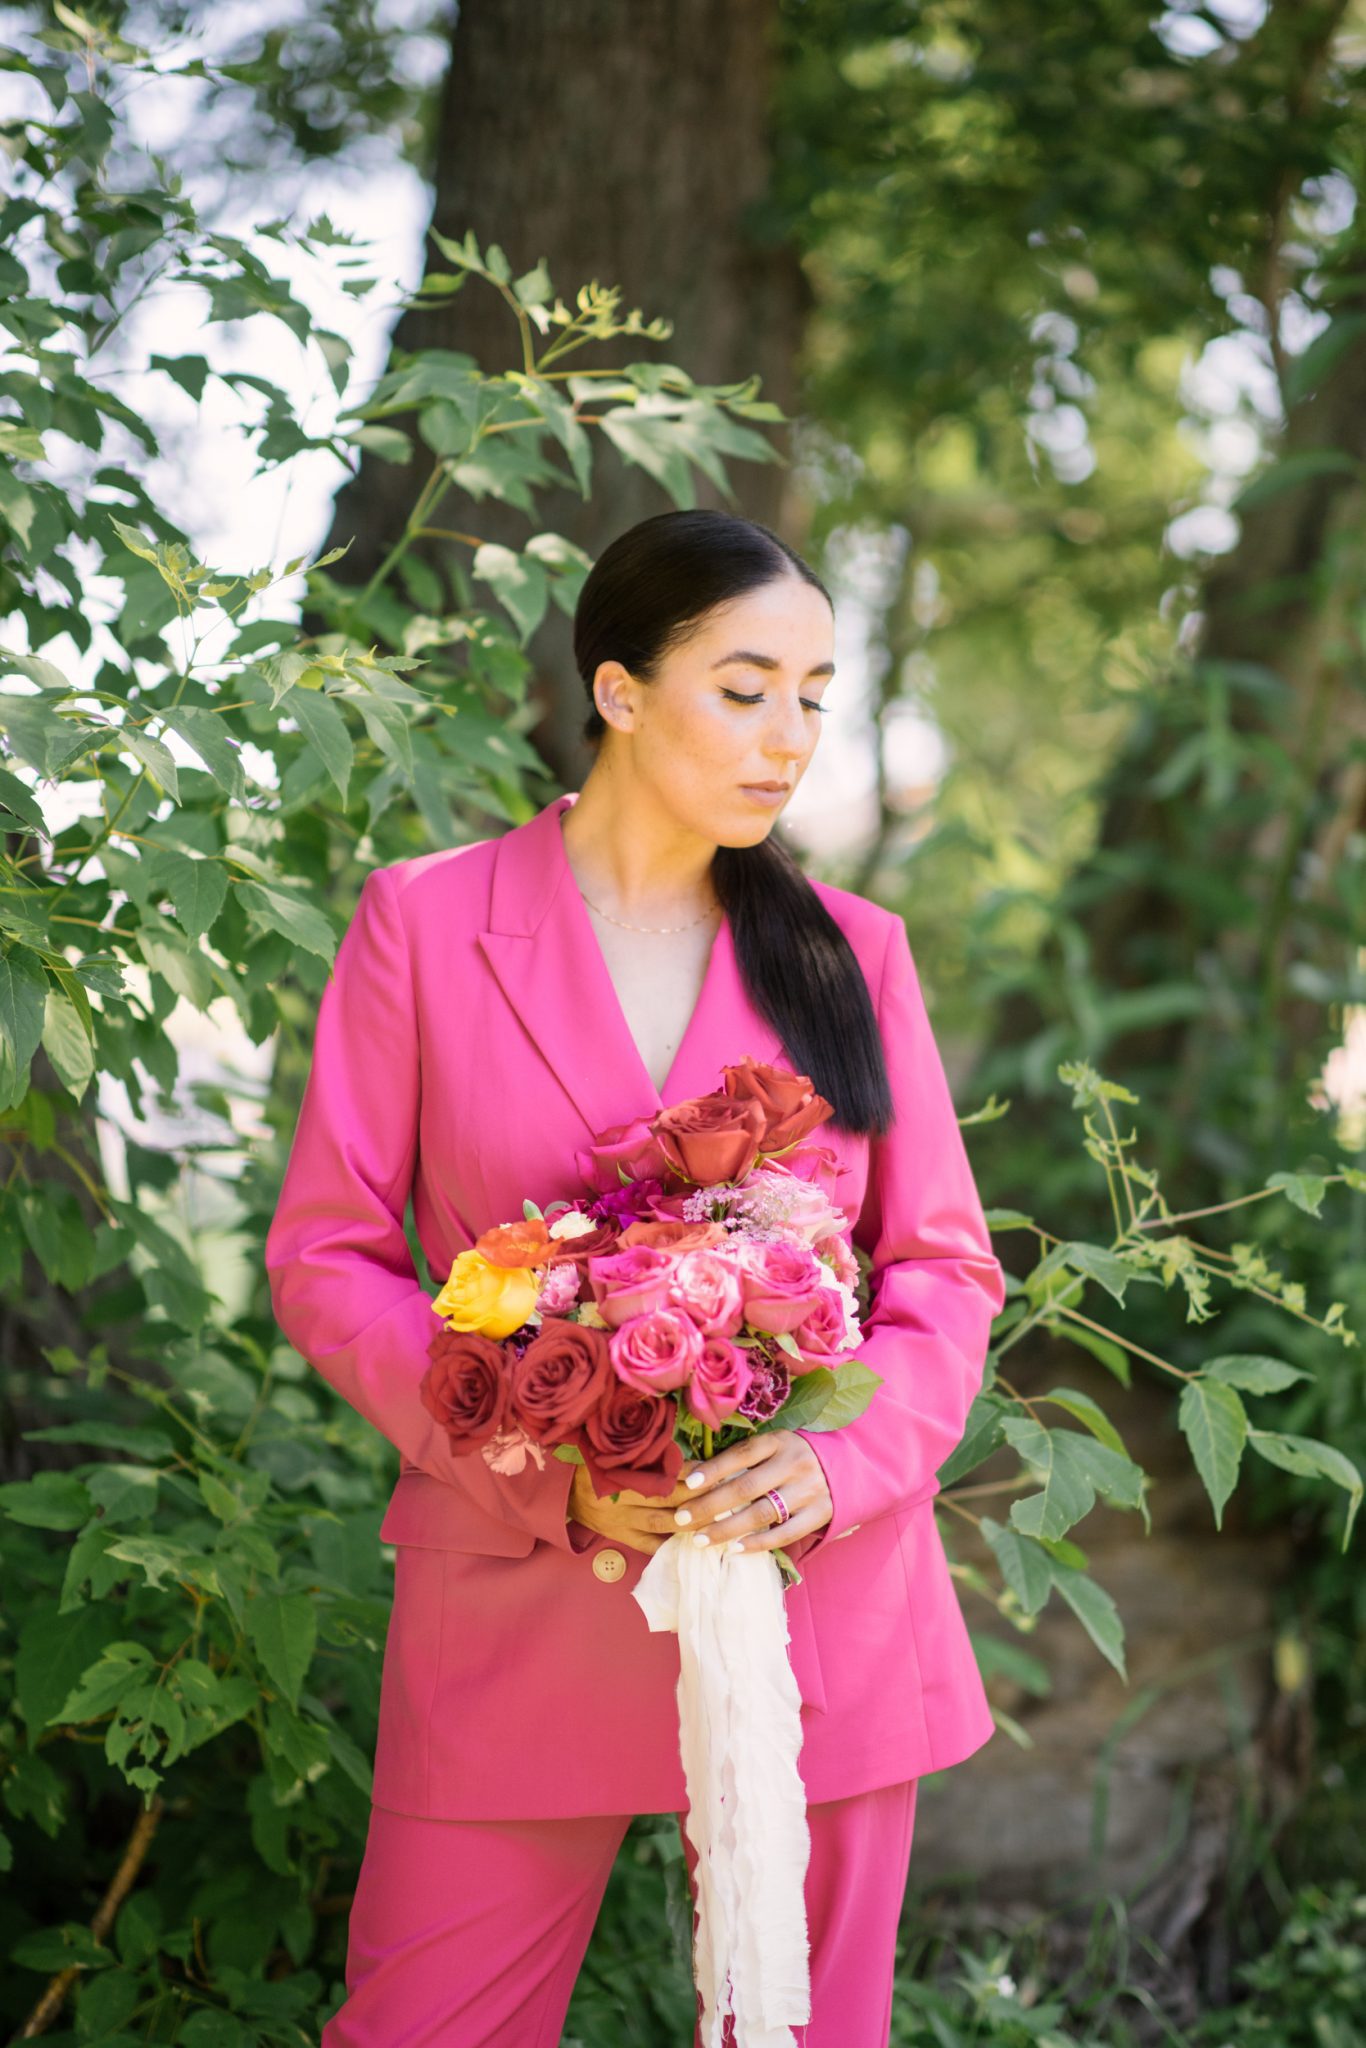 Hot Pink Perfection for this Picnic in the Park Valentine's Day Inspiration Featured by Brontë Bride